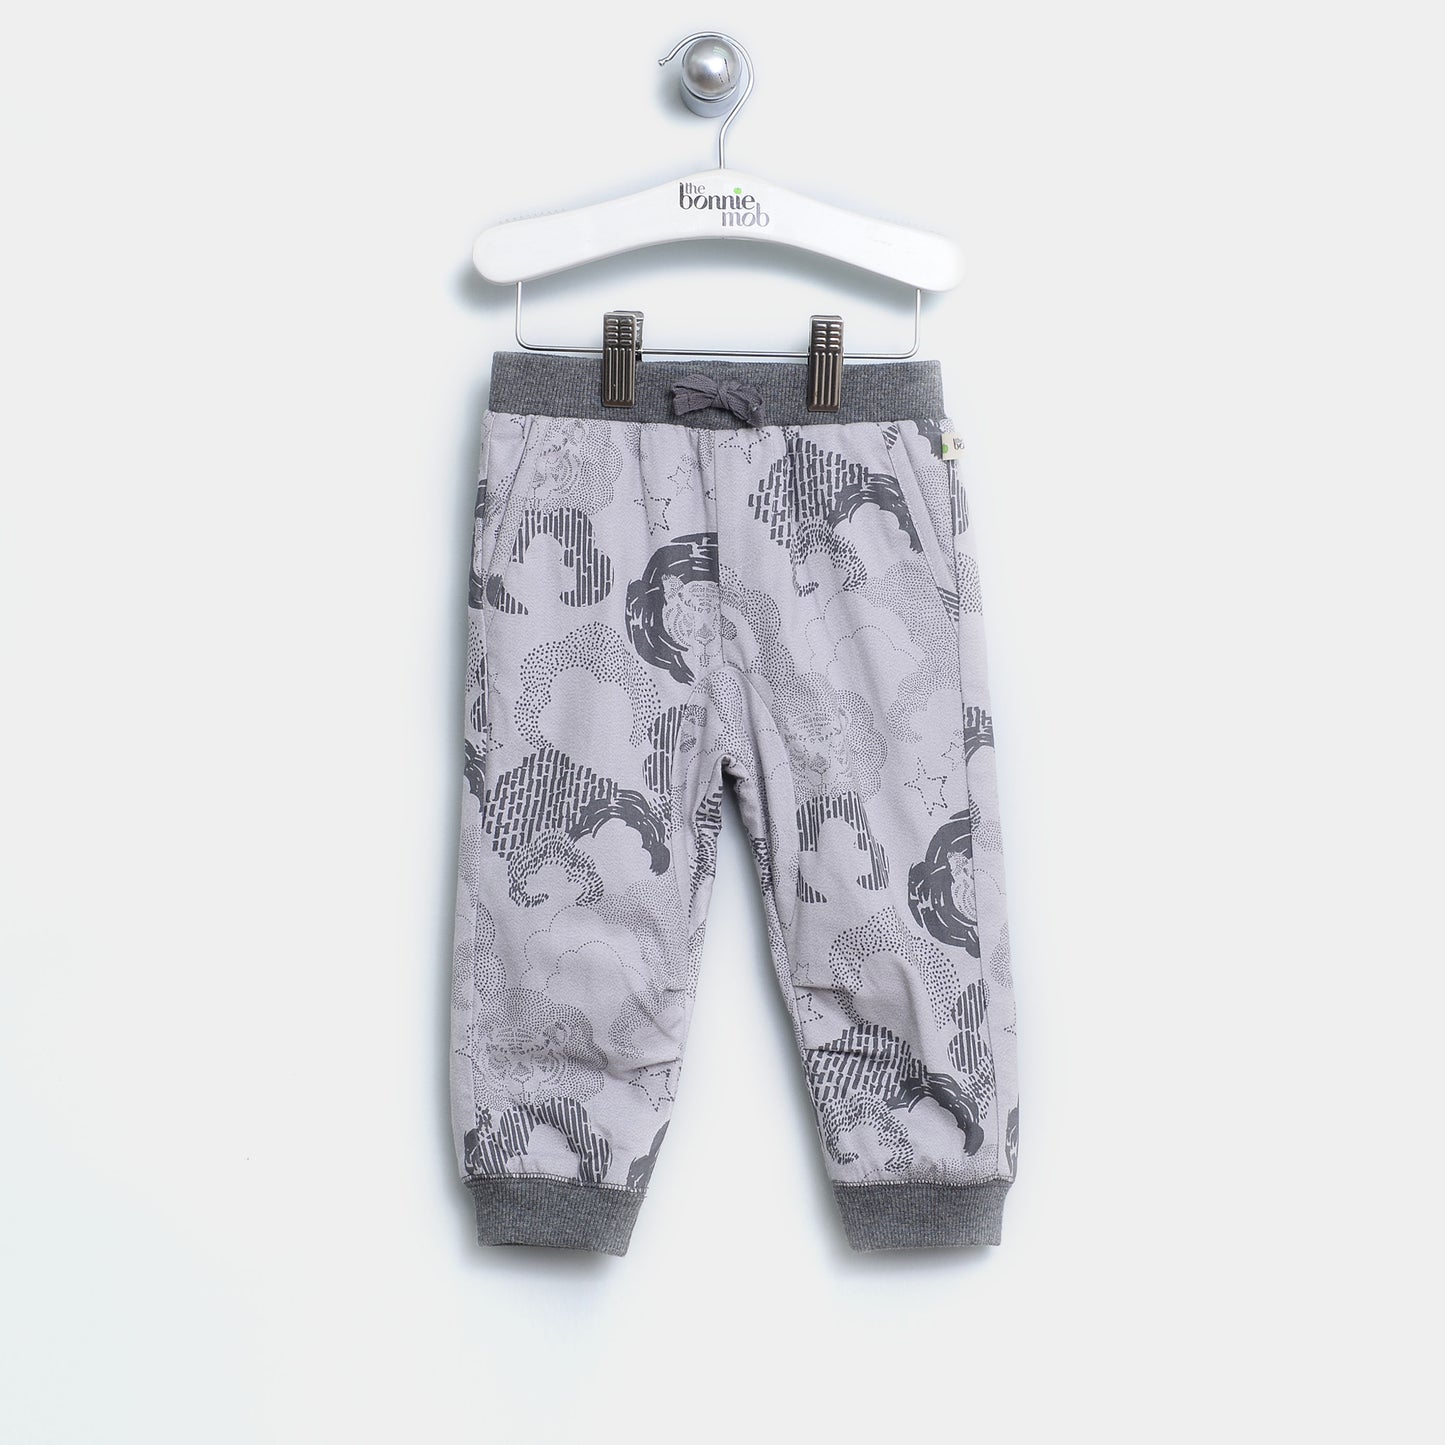 TROUSERS - BABY - GREY - L-ANGUS